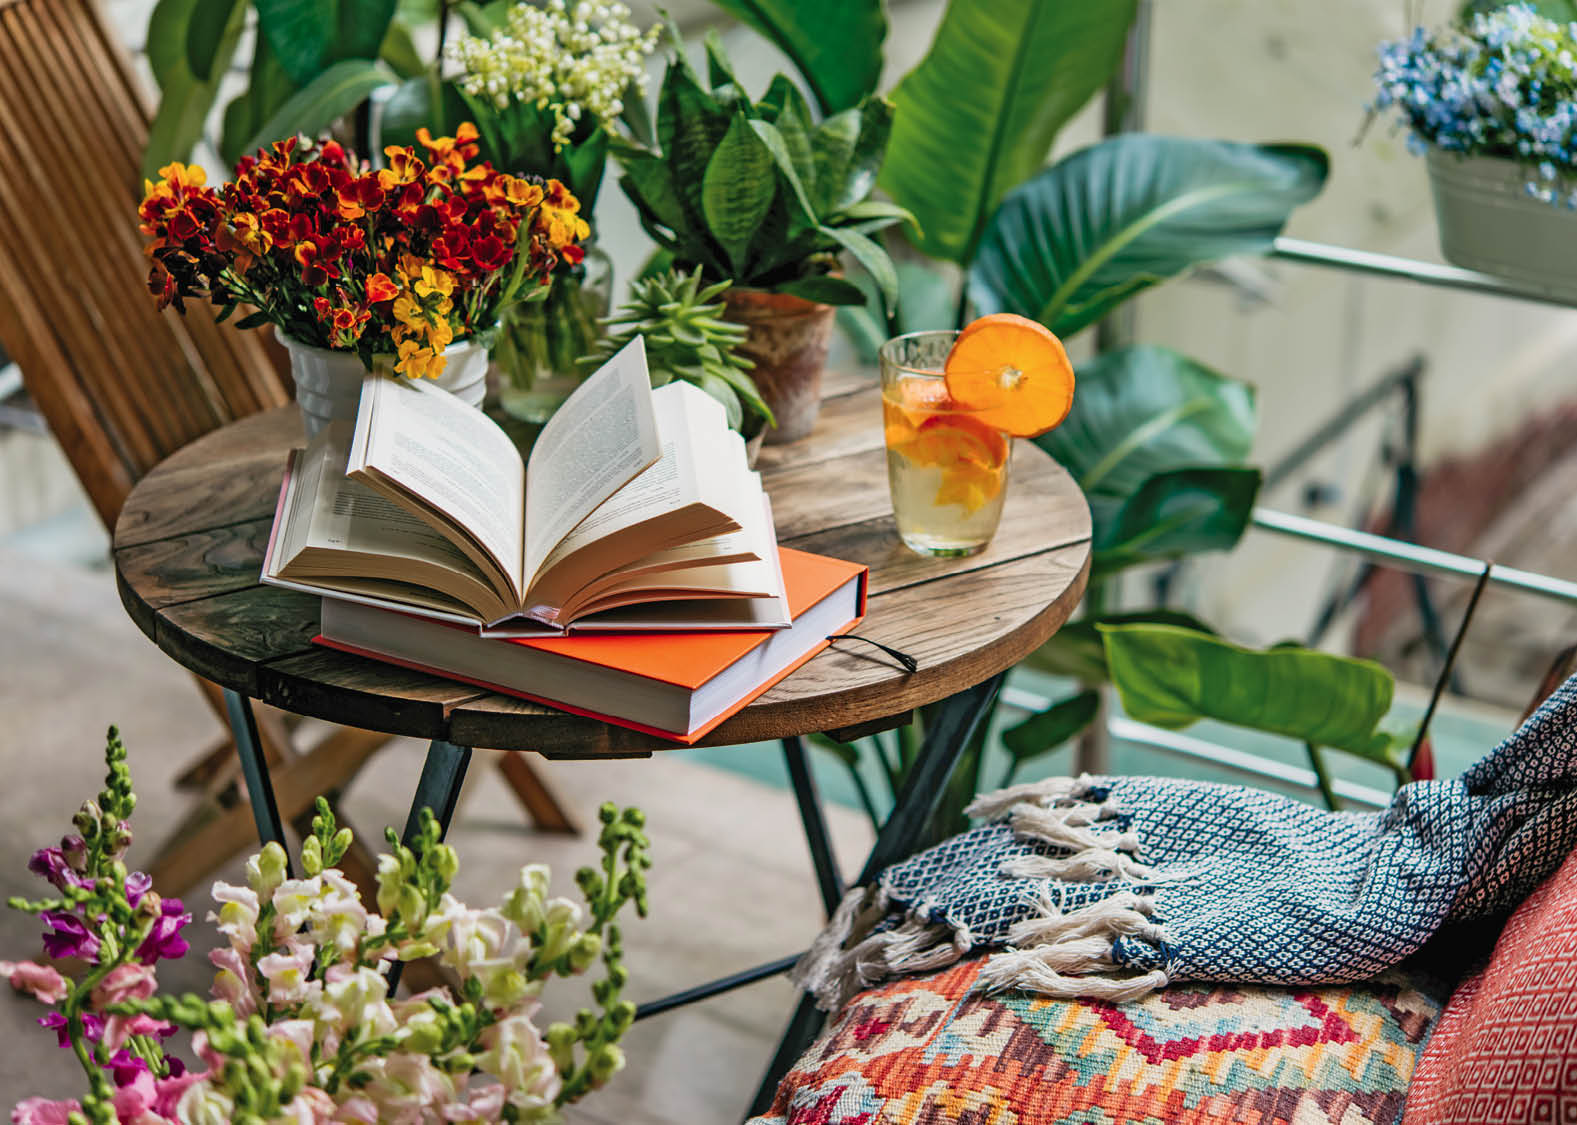 Reading books in summer at a beautiful terrace or cozy balcony full of green plants.